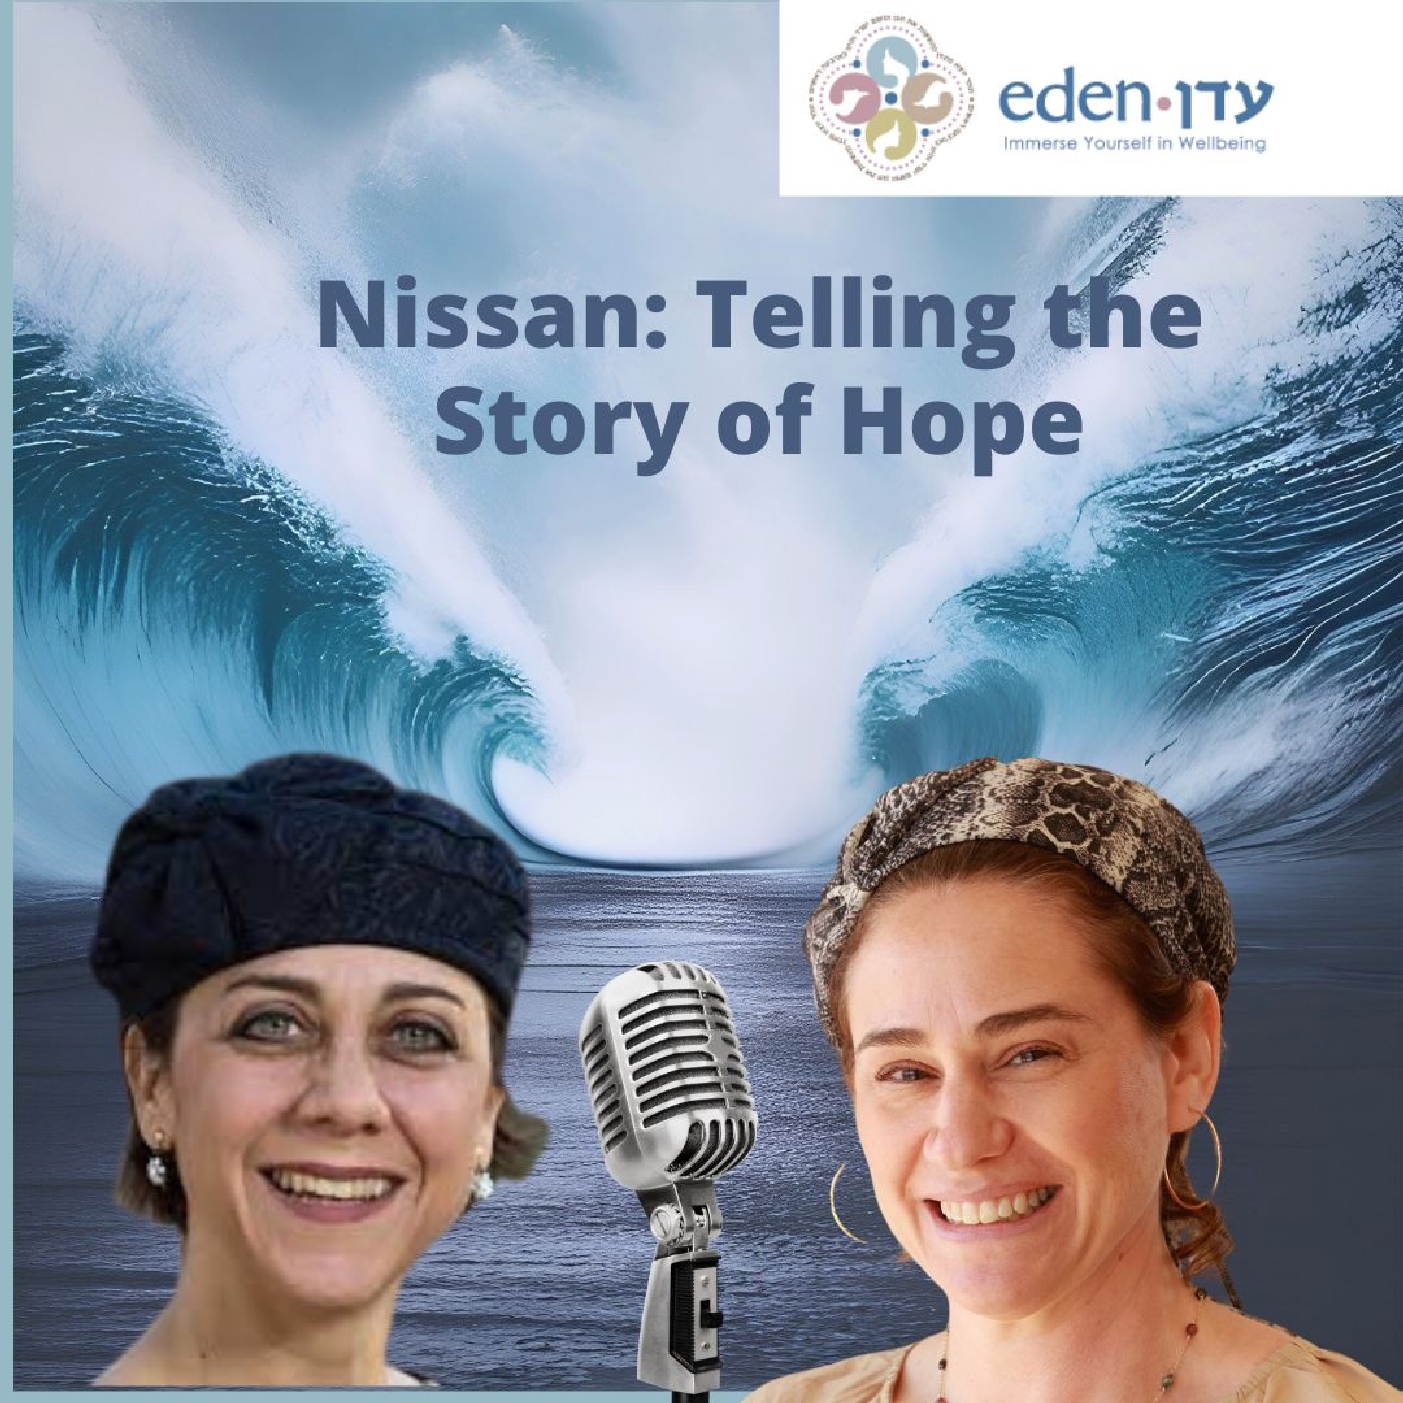 Nissan: Telling the Story of Hope